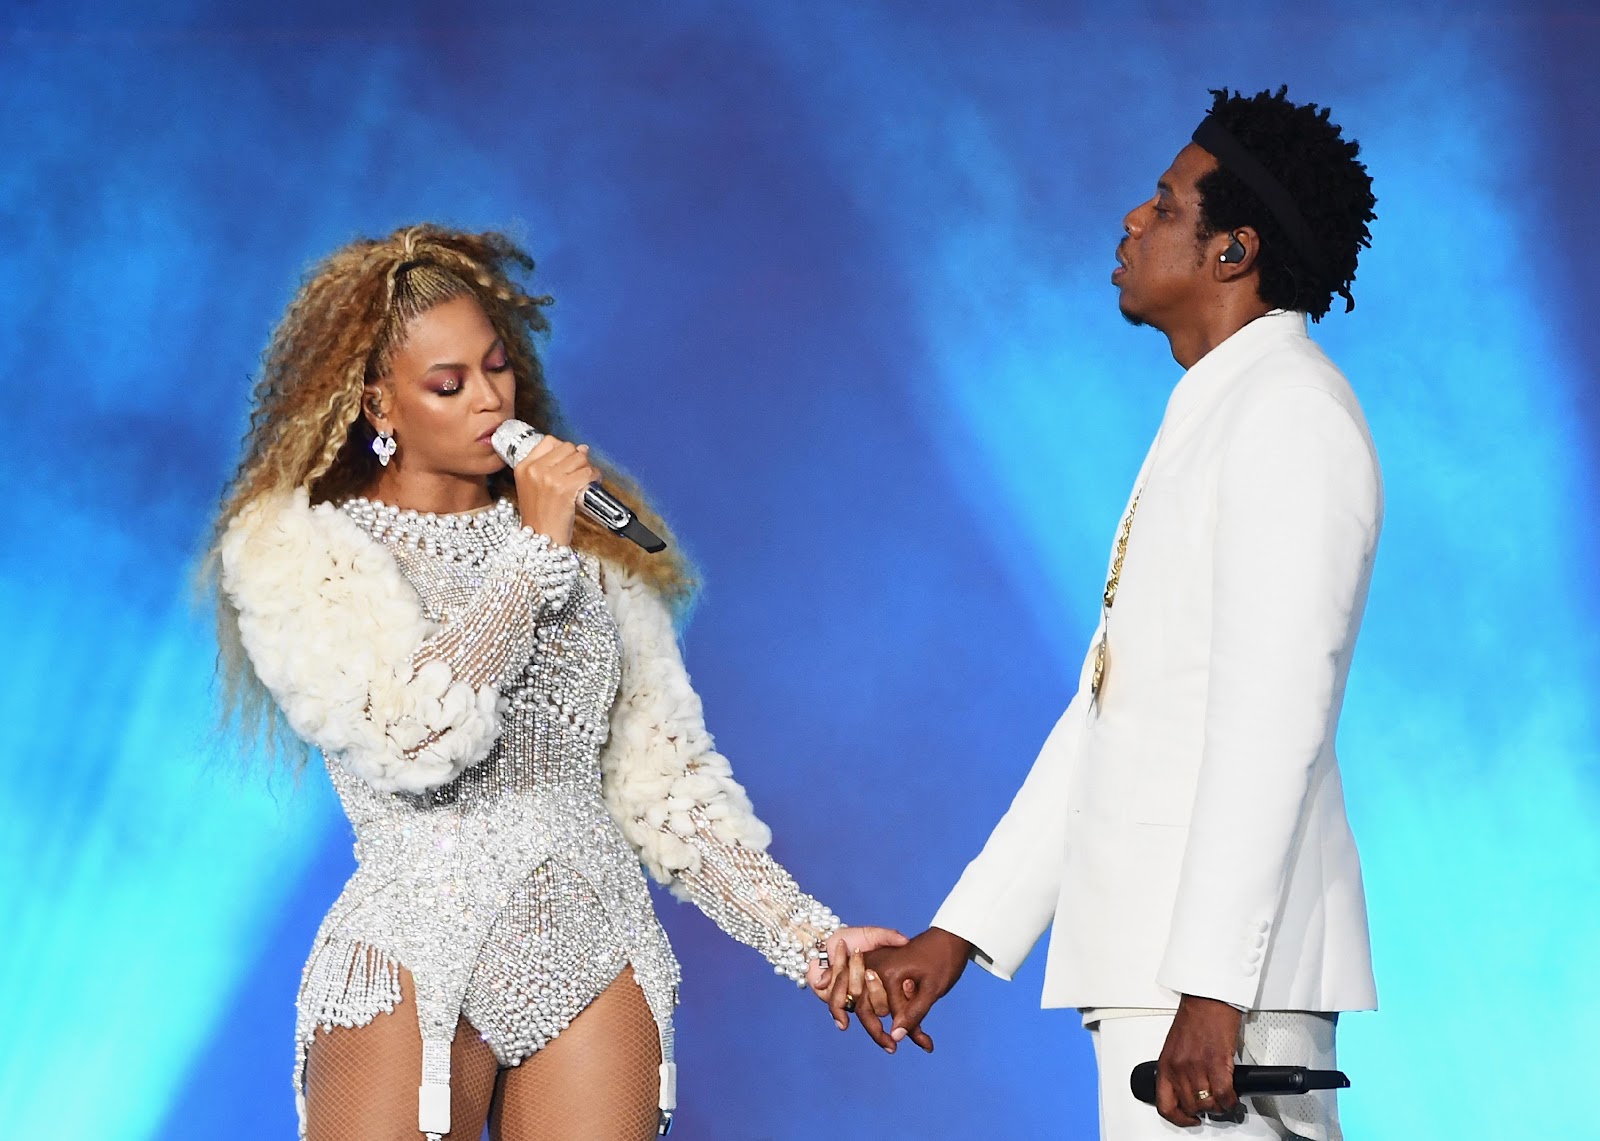 Beyonce and Jay-Z perform onstage during the "On The Run II" Tour.